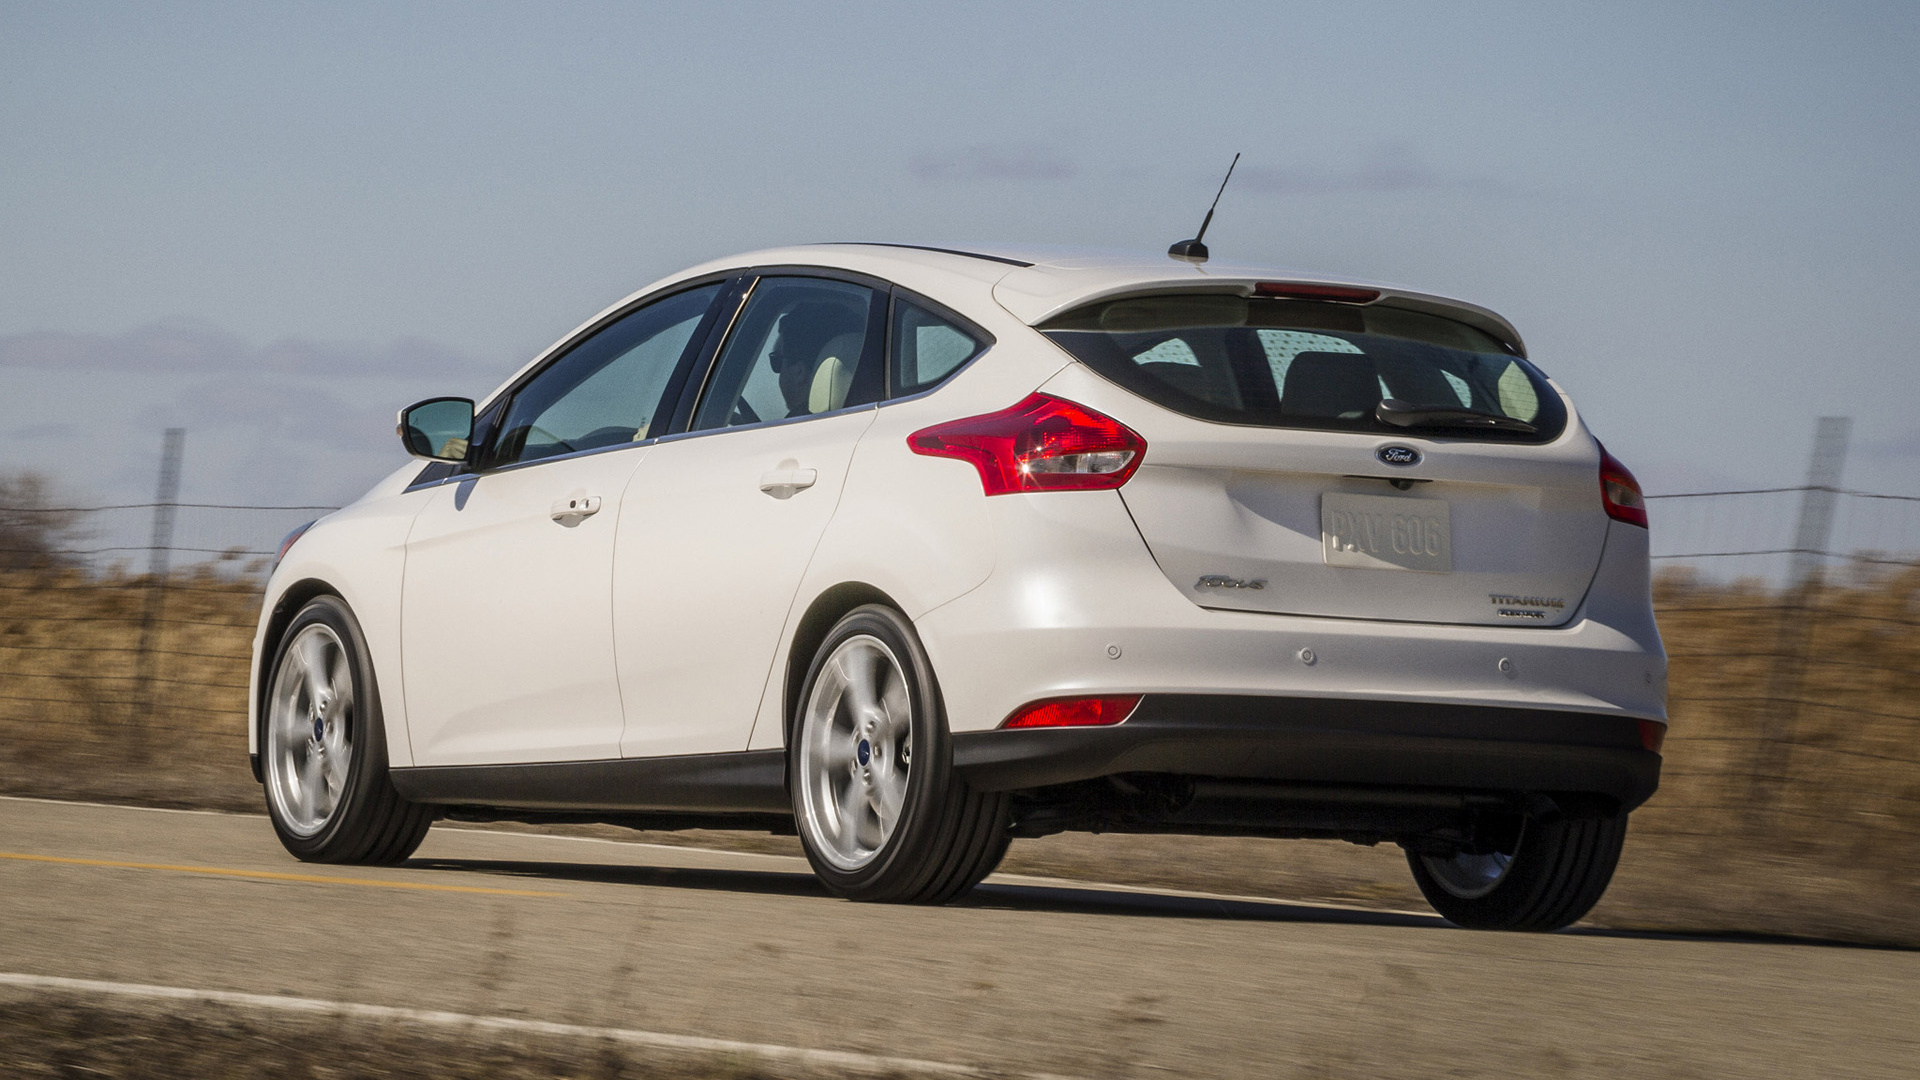 2015 Ford Focus (US) - Wallpapers and HD Images | Car Pixel